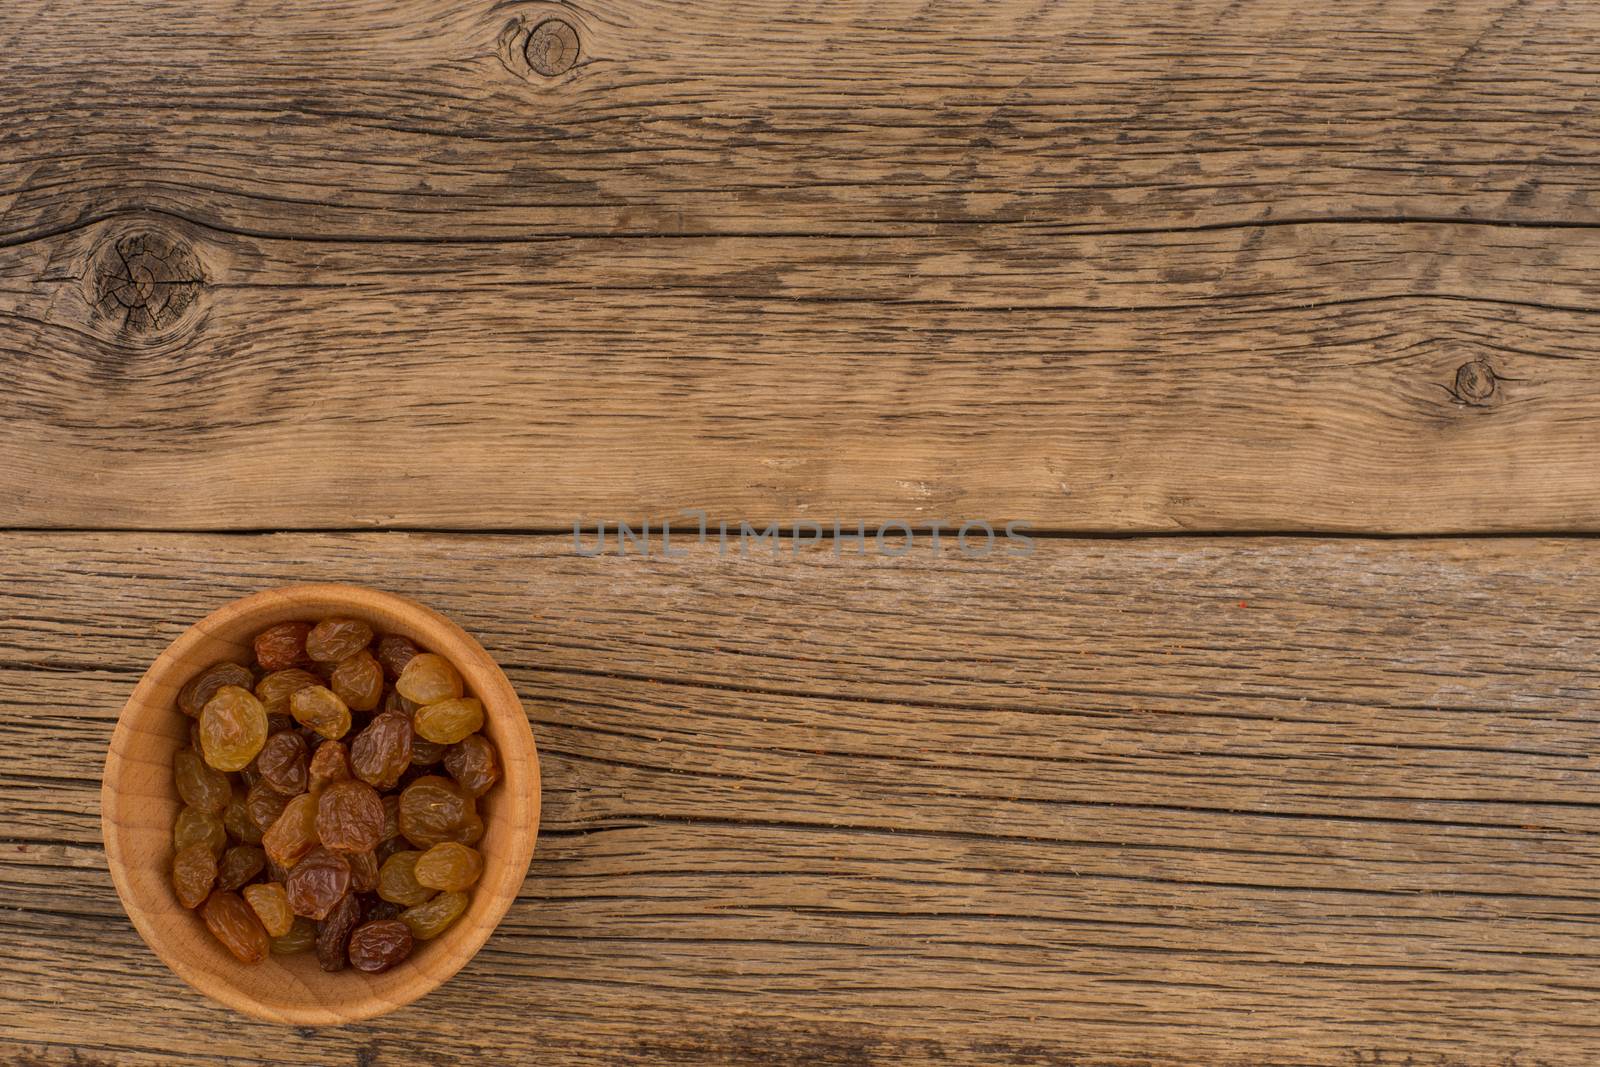 Raisins in a wooden bowl on the old wooden table. by DGolbay